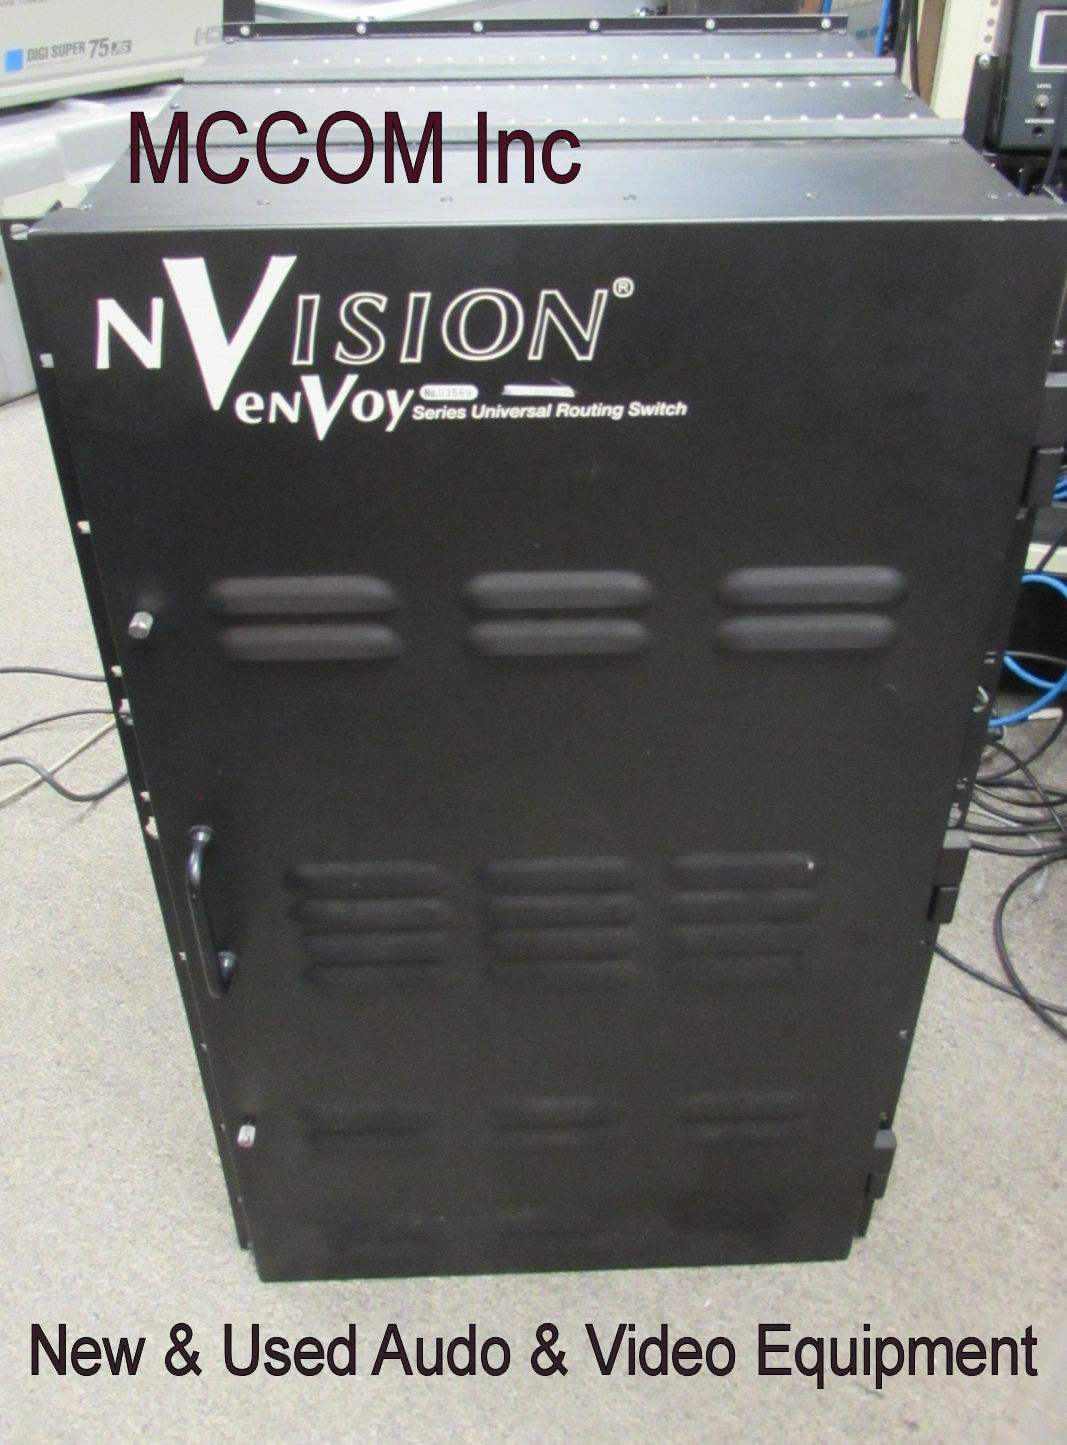 NVision NV9601 XY Control Panel for NVision Router w/ Power Cord 